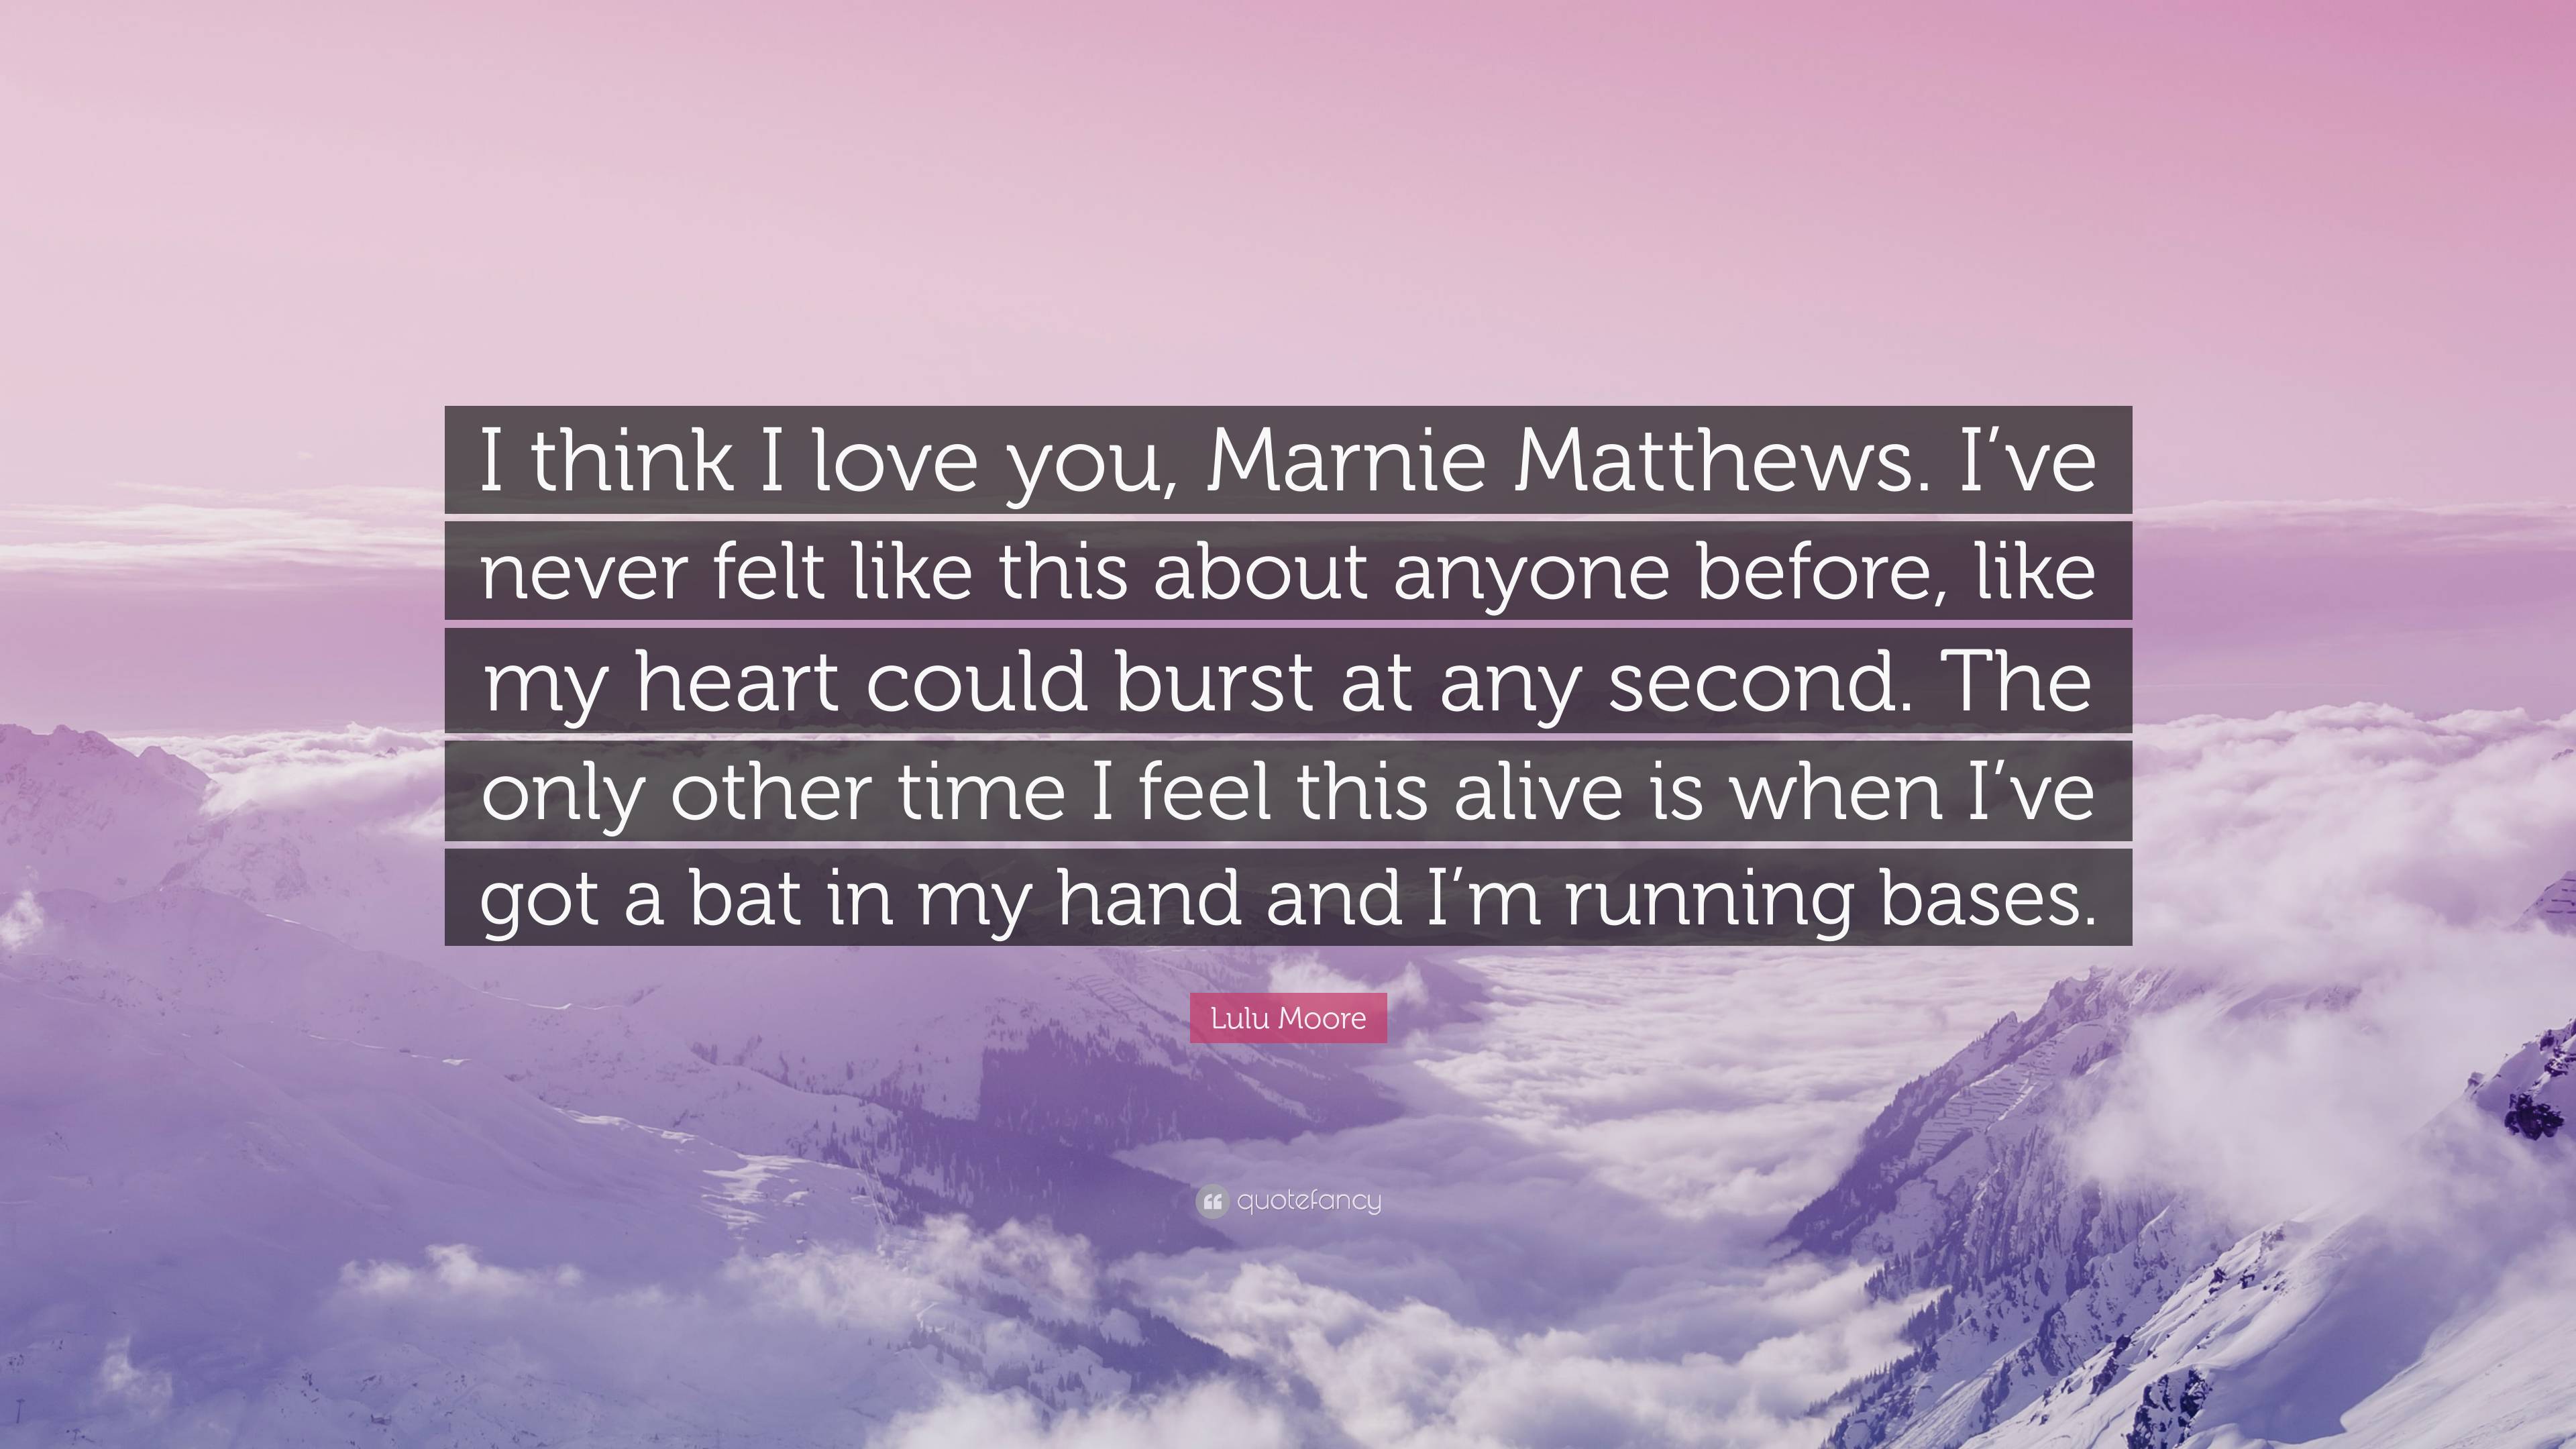 Lulu Moore Quote: “I think I love you, Marnie Matthews. I've never felt  like this about anyone before, like my heart could burst at any sec”